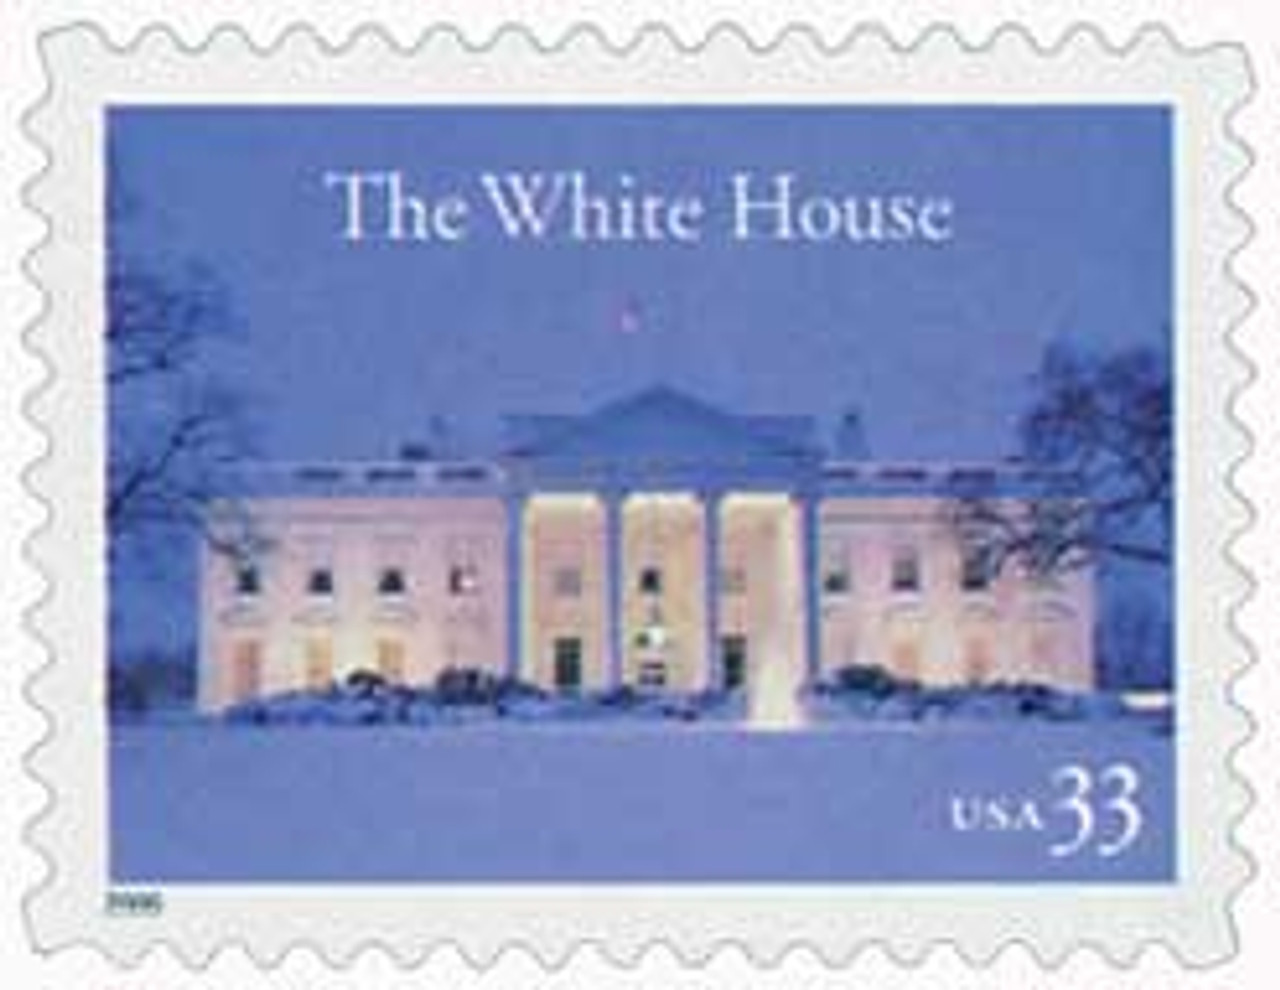 THE WHITE HOUSE - WASHINGTON, DC - SET OF 8 U.S. POSTAGE STAMPS - MINT  CONDITION